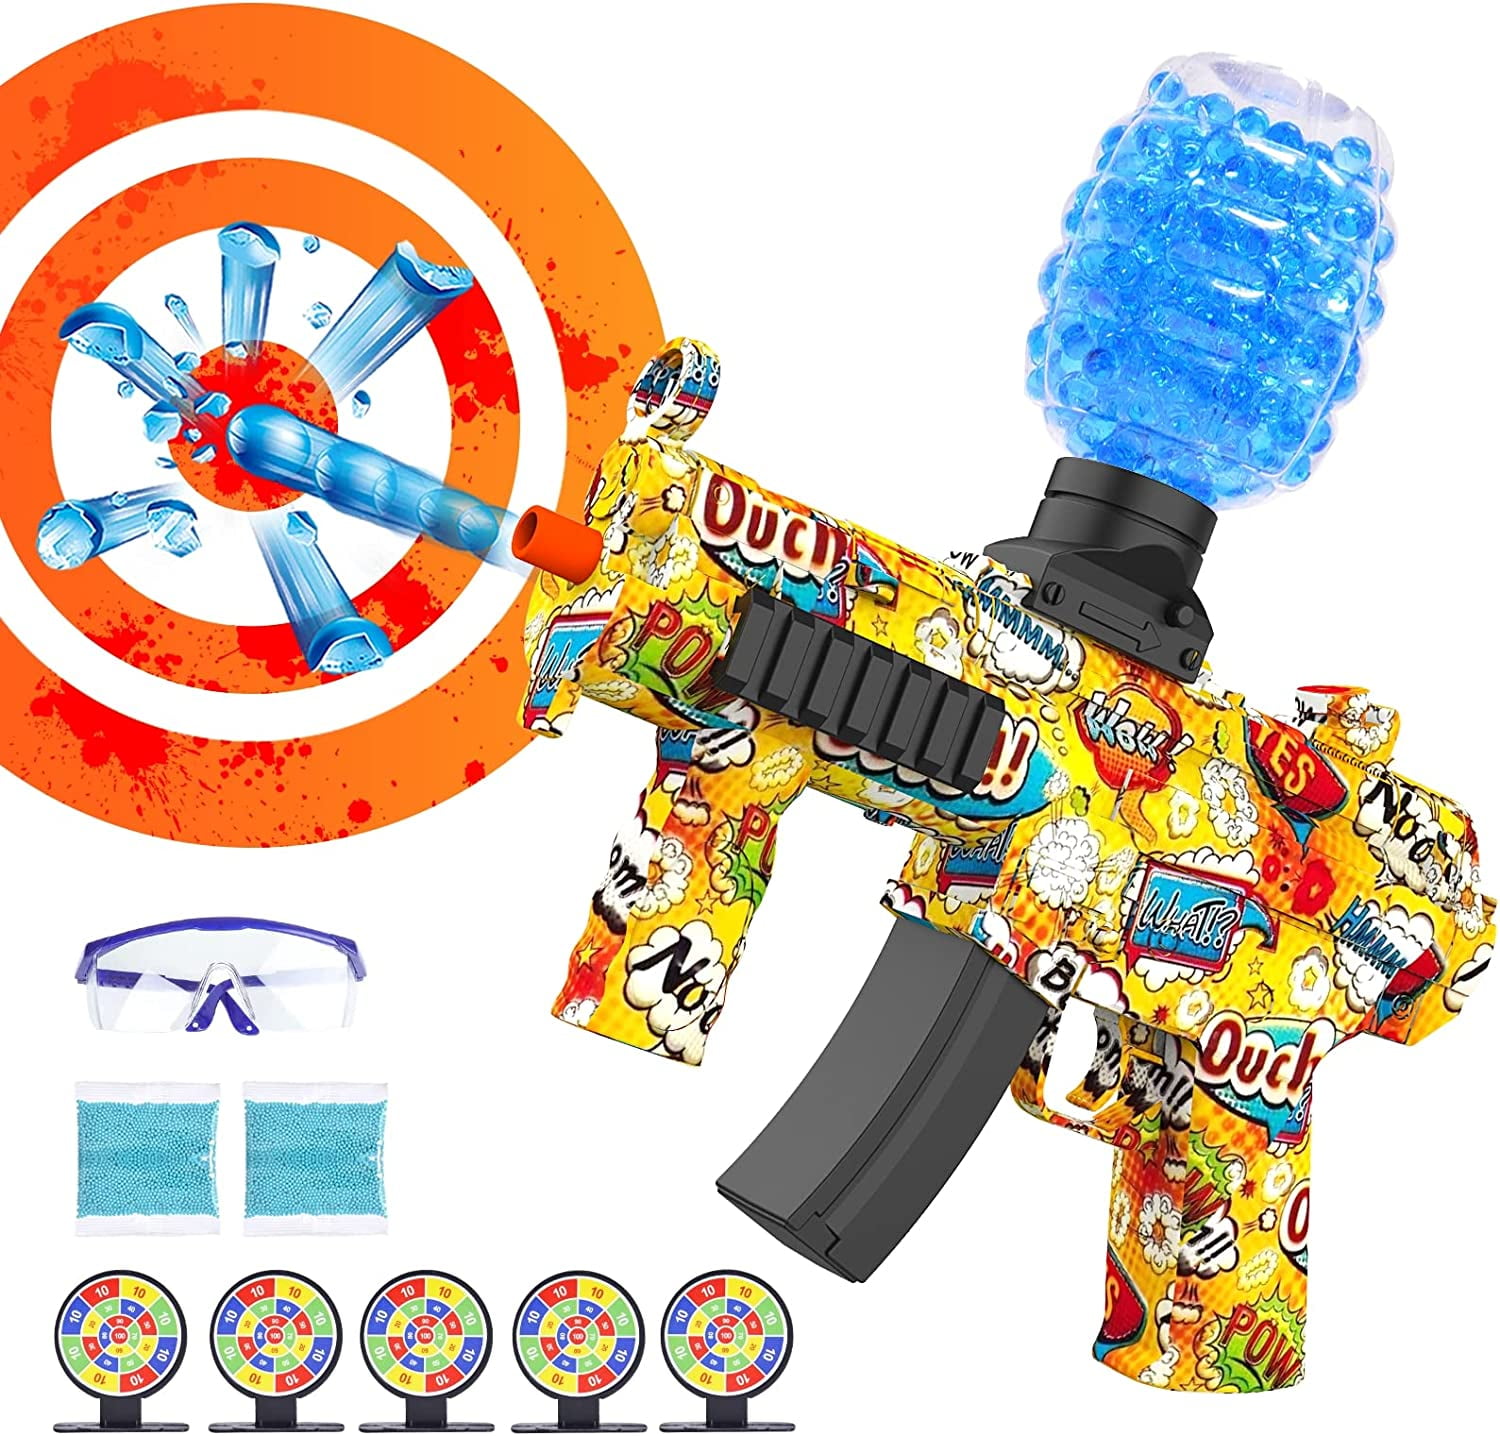 Gatling Gun Foam Blaster with 60 Darts, 6 Mini Target Cans, and Wrist Ammo  Holder – Small Easy Pull Minigun for Toddlers Age 3-5 Compatible with Nerf